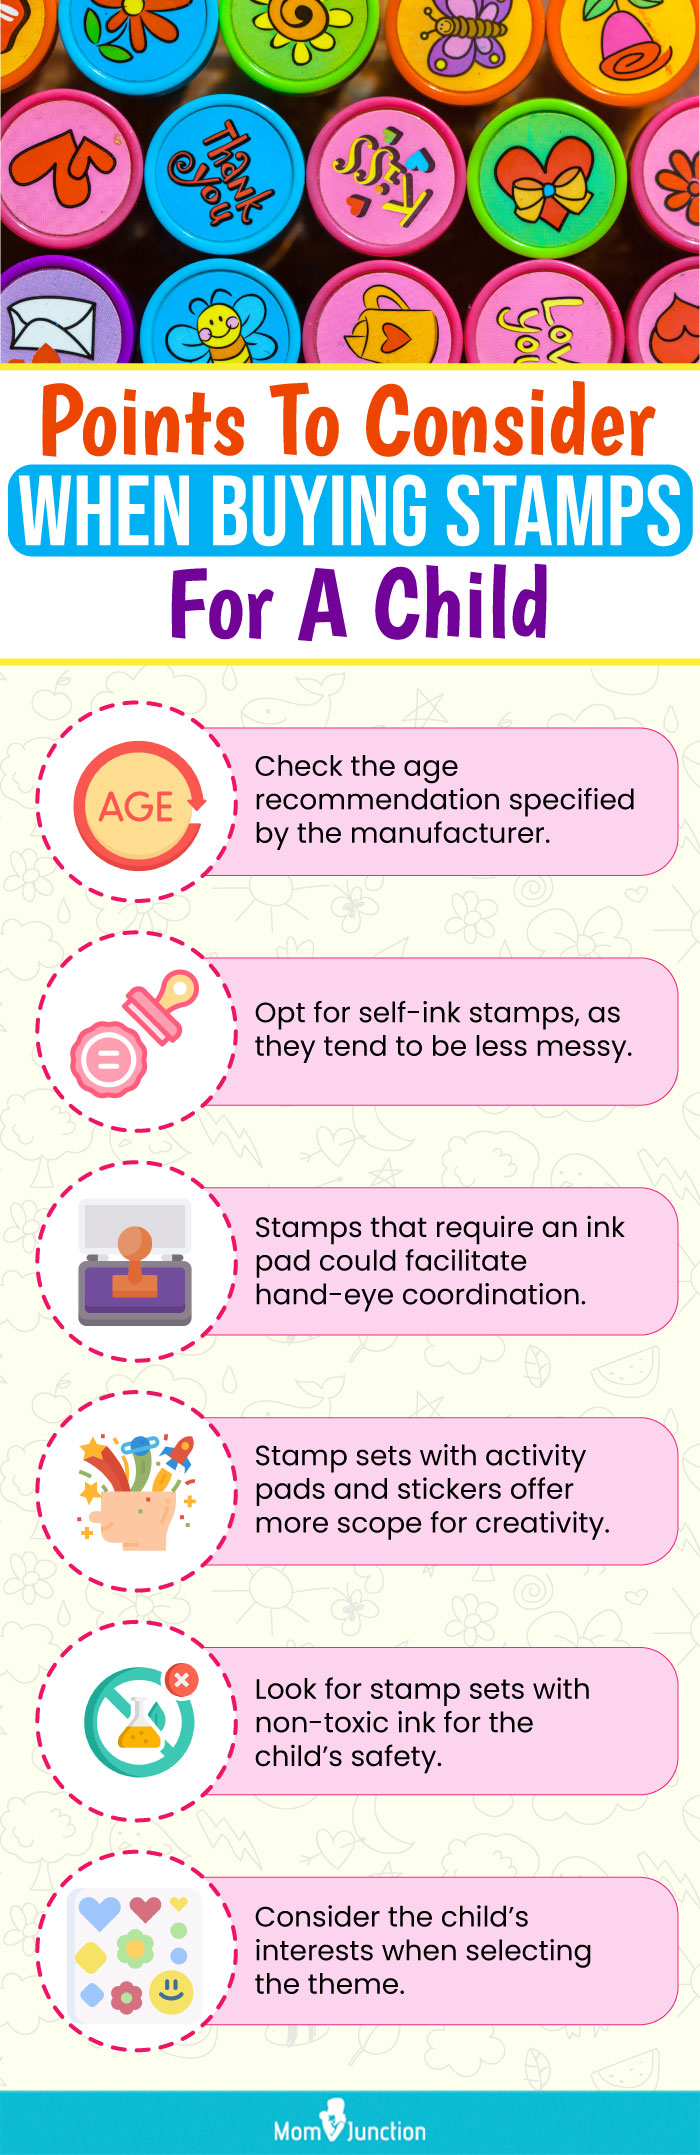 Points To Consider When Buying Stamps For A Child (Infographic)